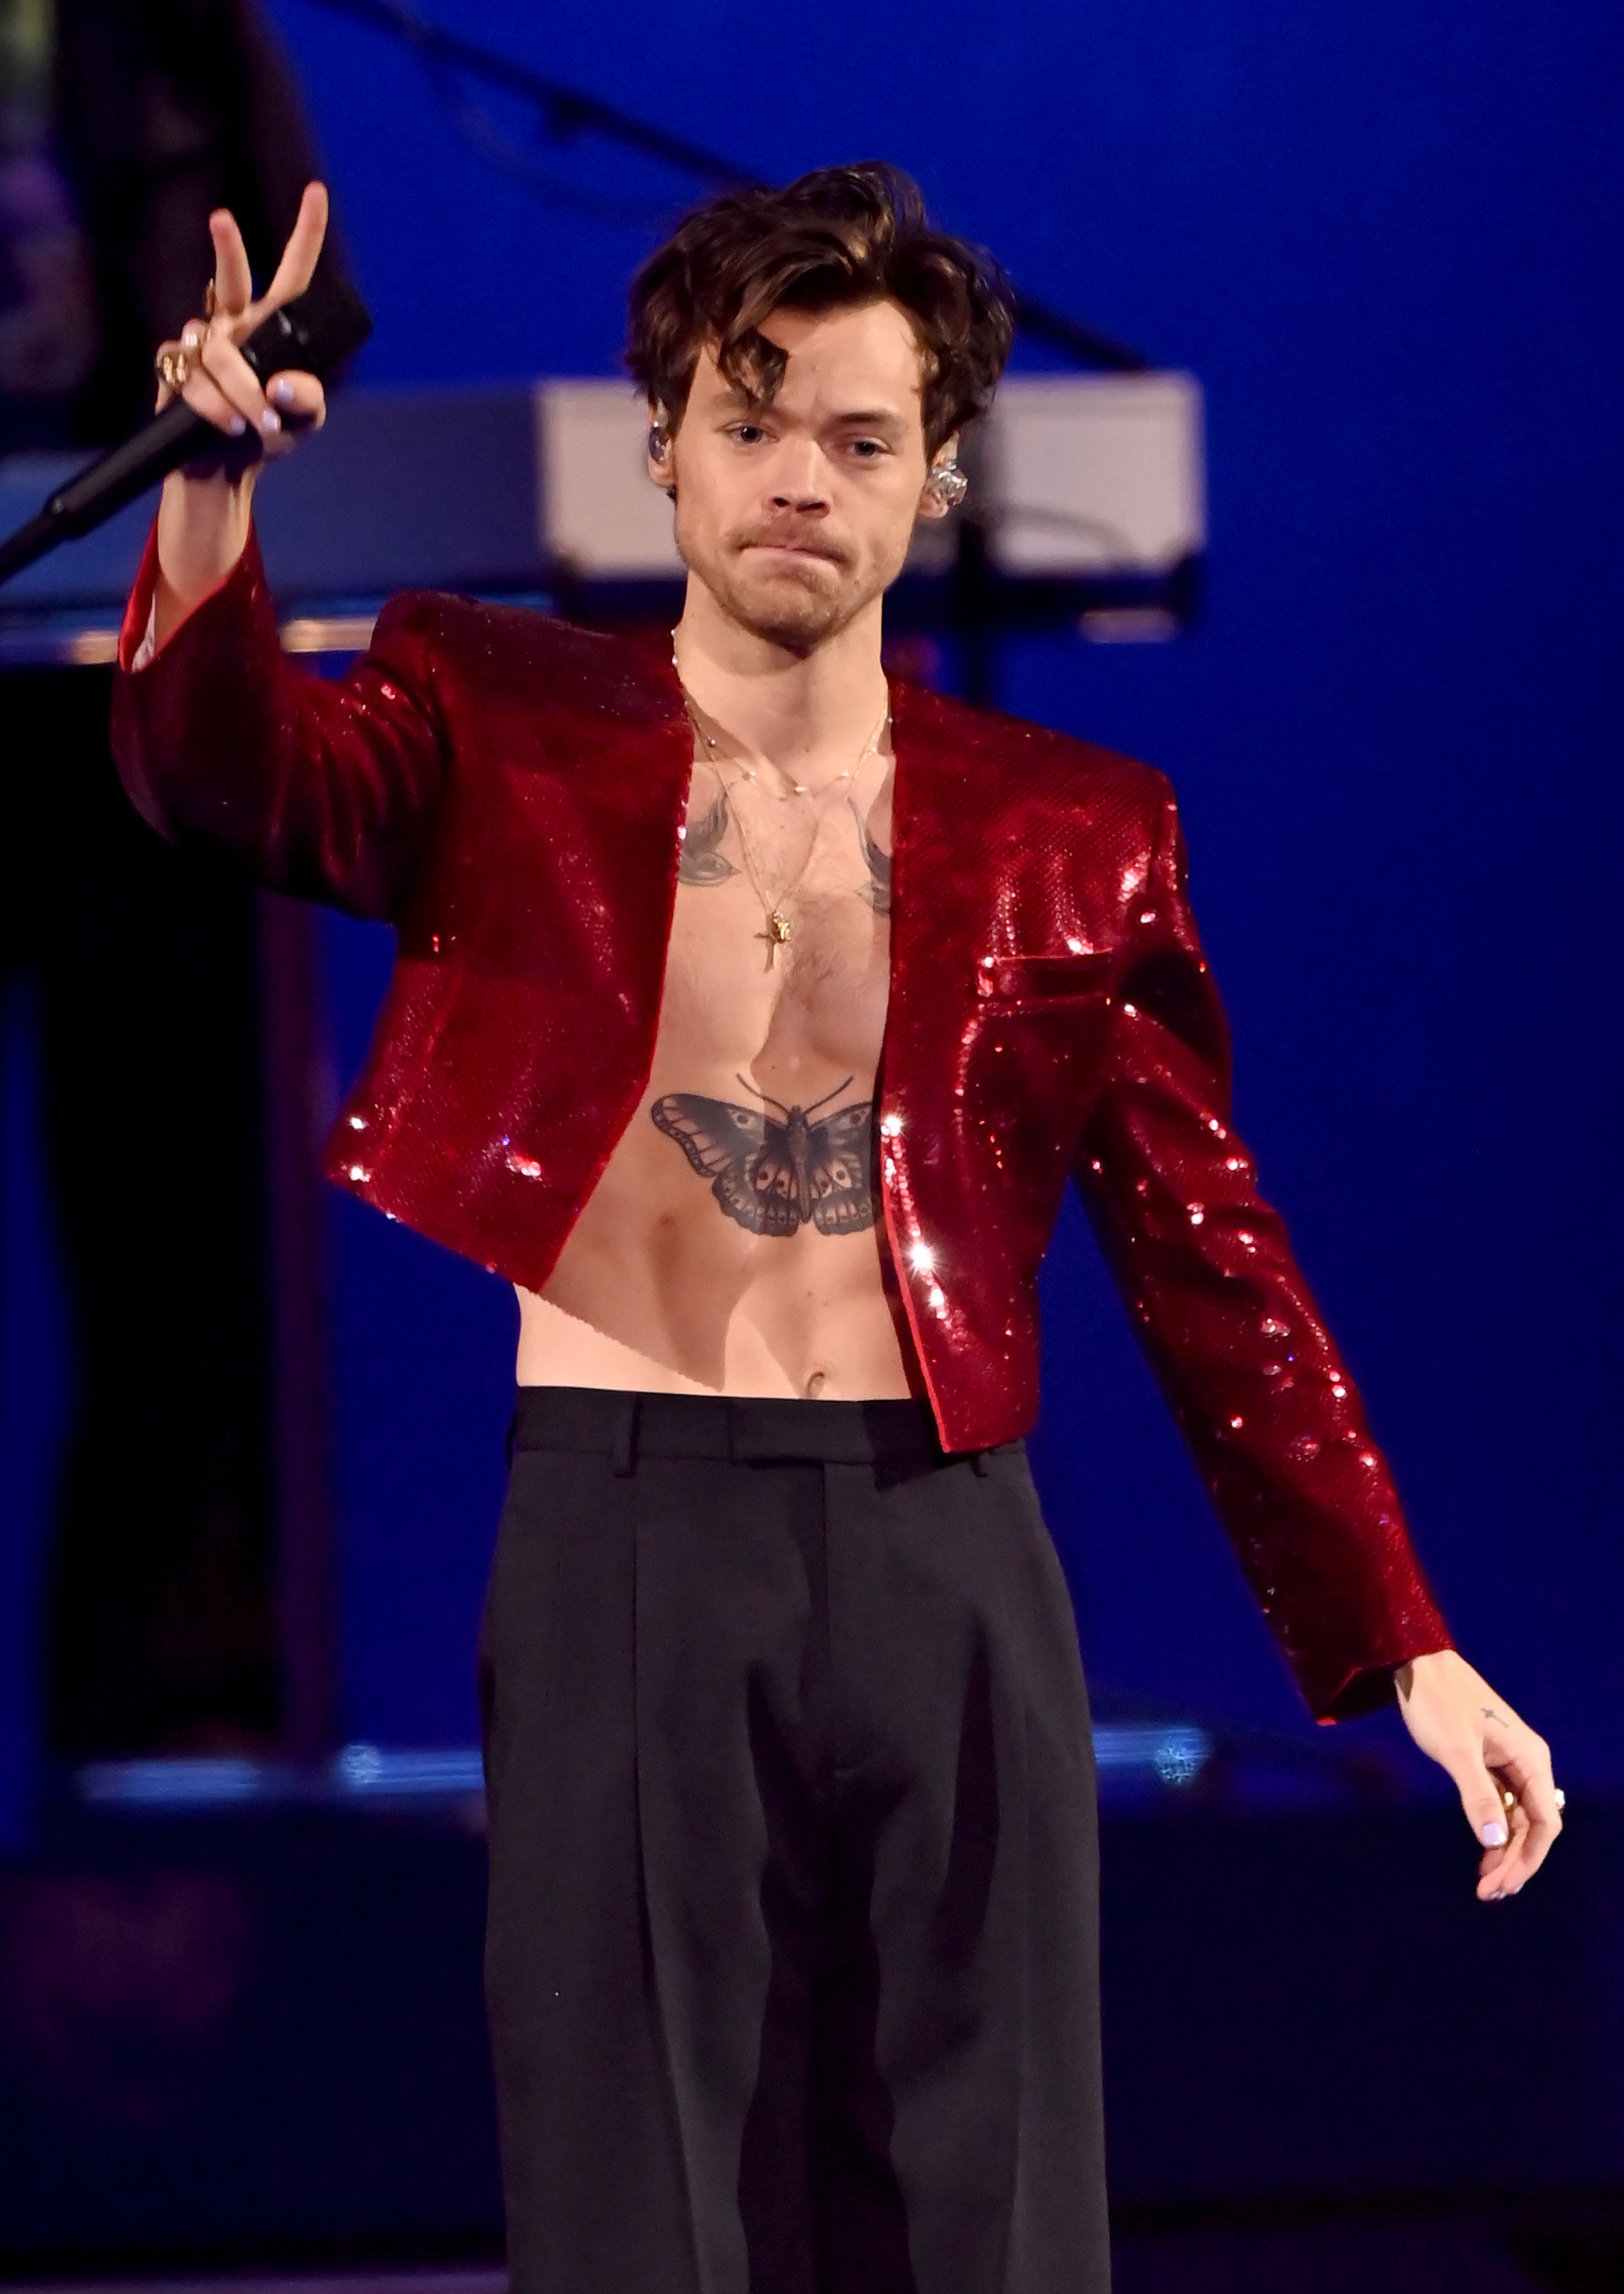 on stage with long-ish hair and shirtless under a blazer